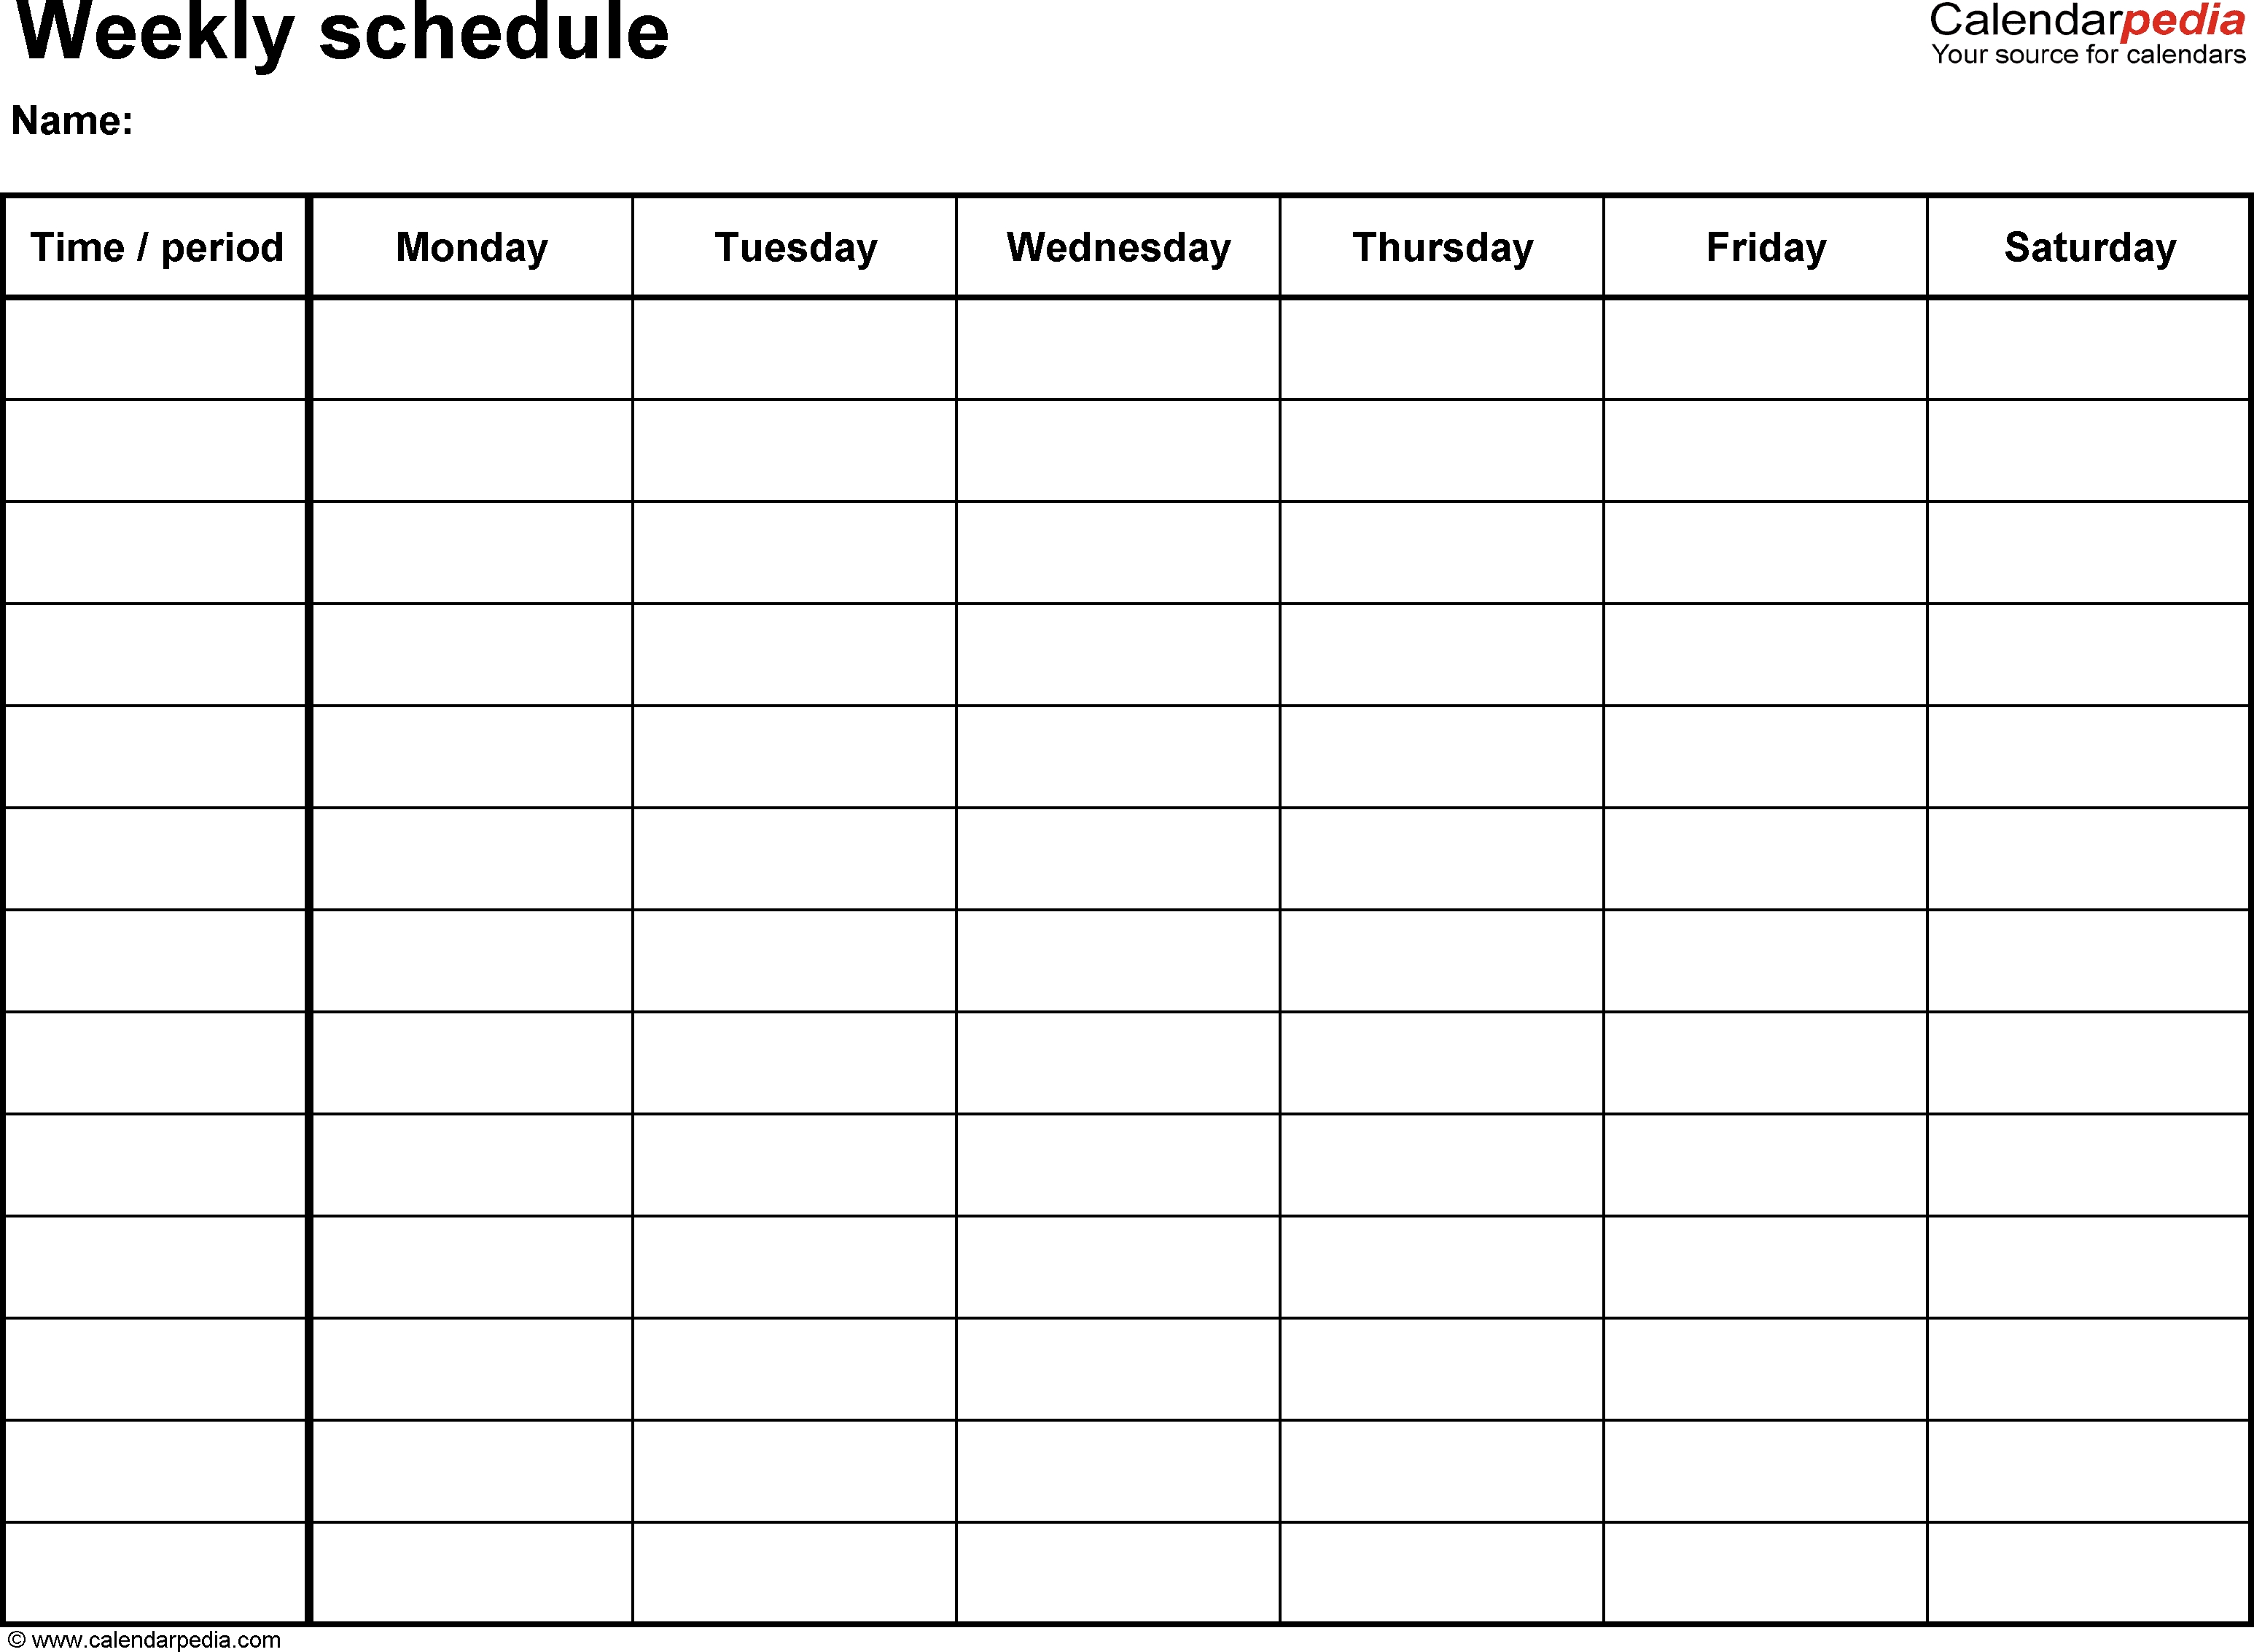 Monthly Calendar Template Excel Free Planner Download Schedule | Smorad with Free One Month Schedule Templates